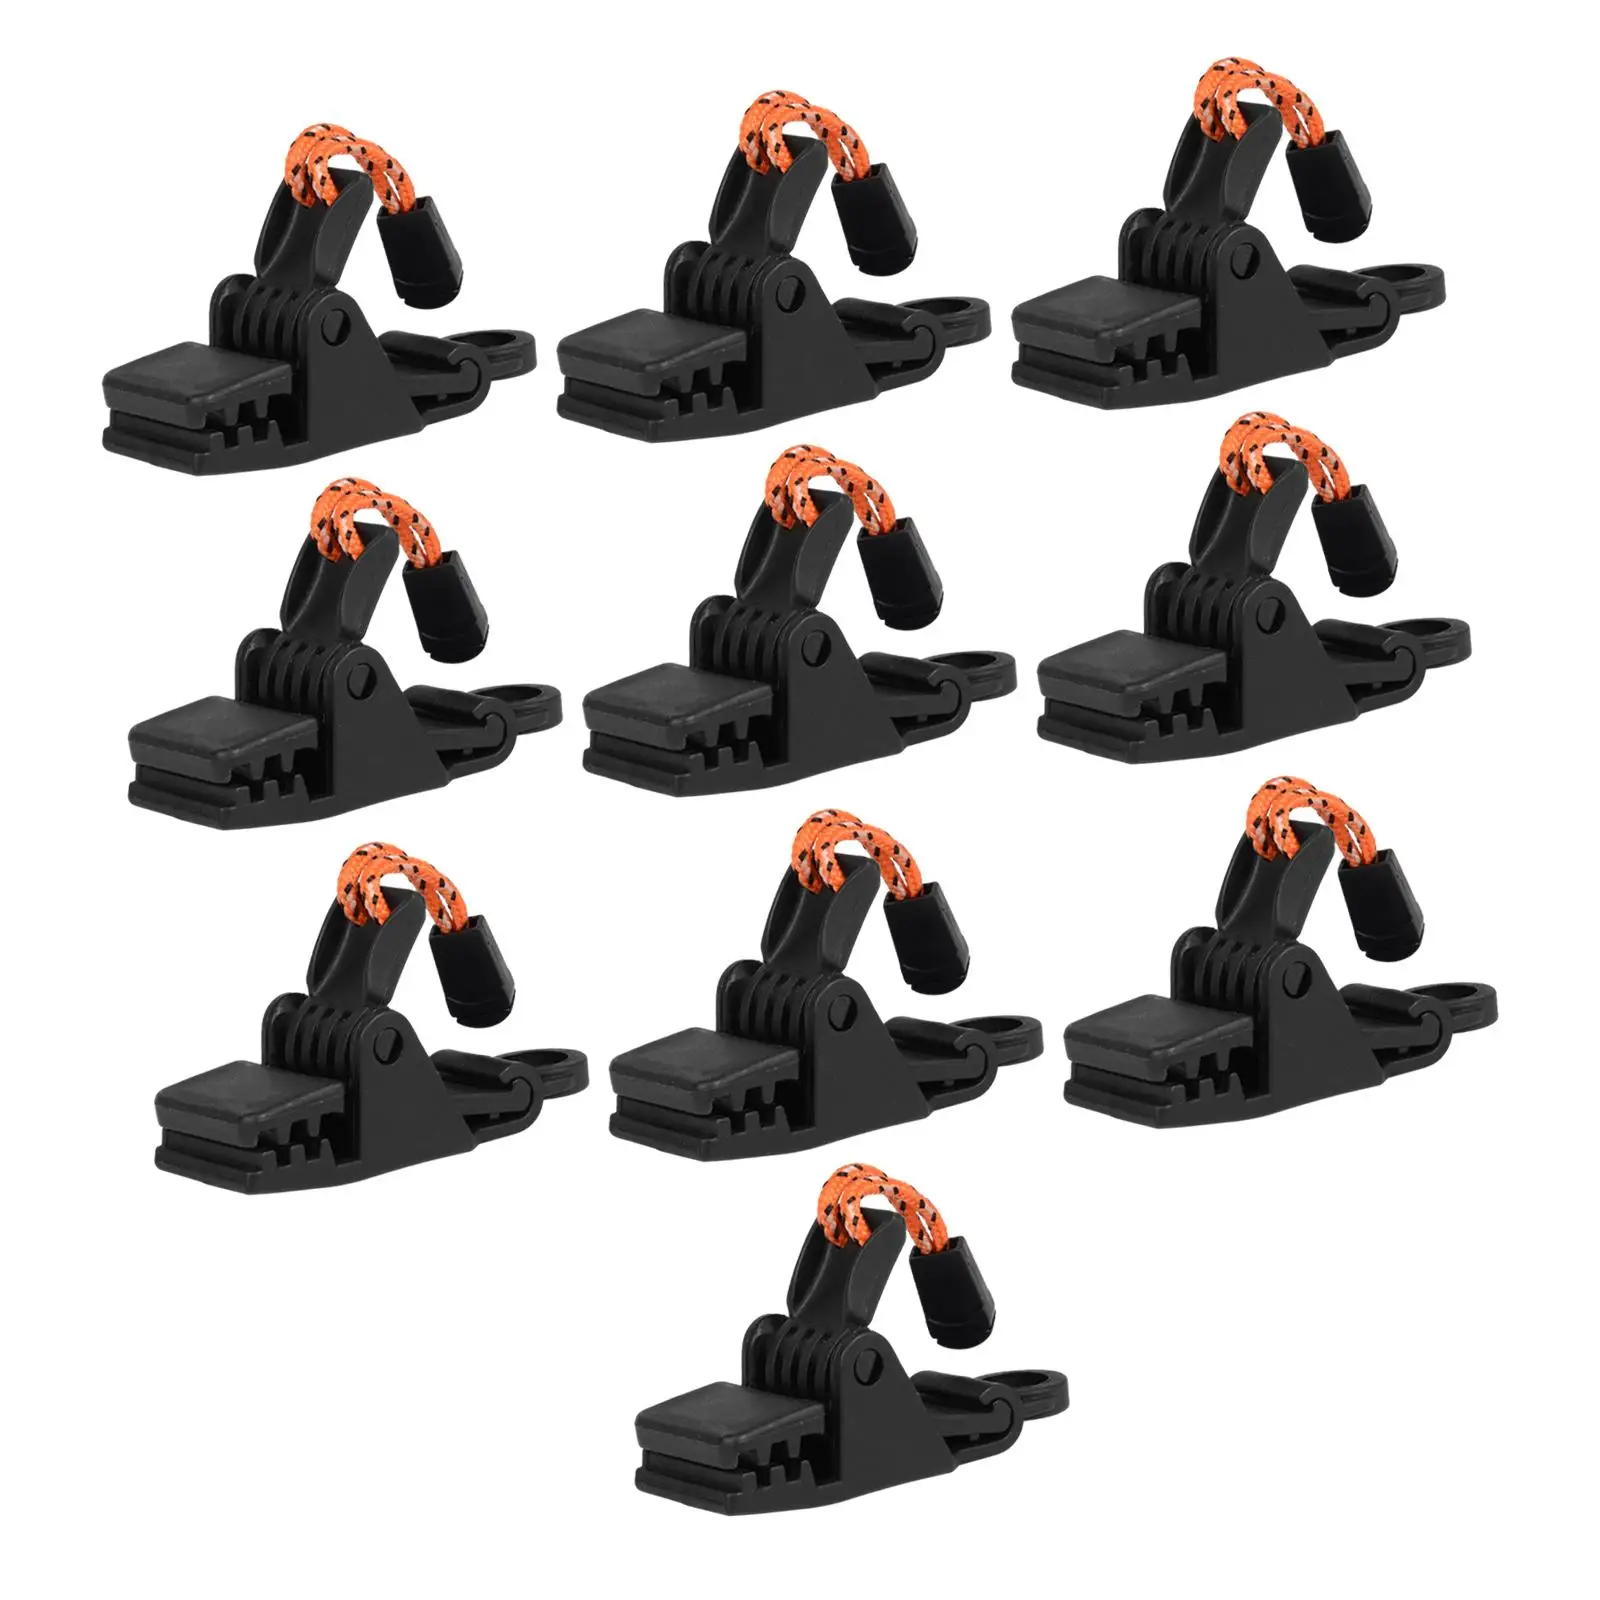 10x Tarp Clips Heavy Duty Sturdy Portable Lightweight Lock Grip Clamps for Outdoor Canopies Car Covers Shade Cloth Backpacking